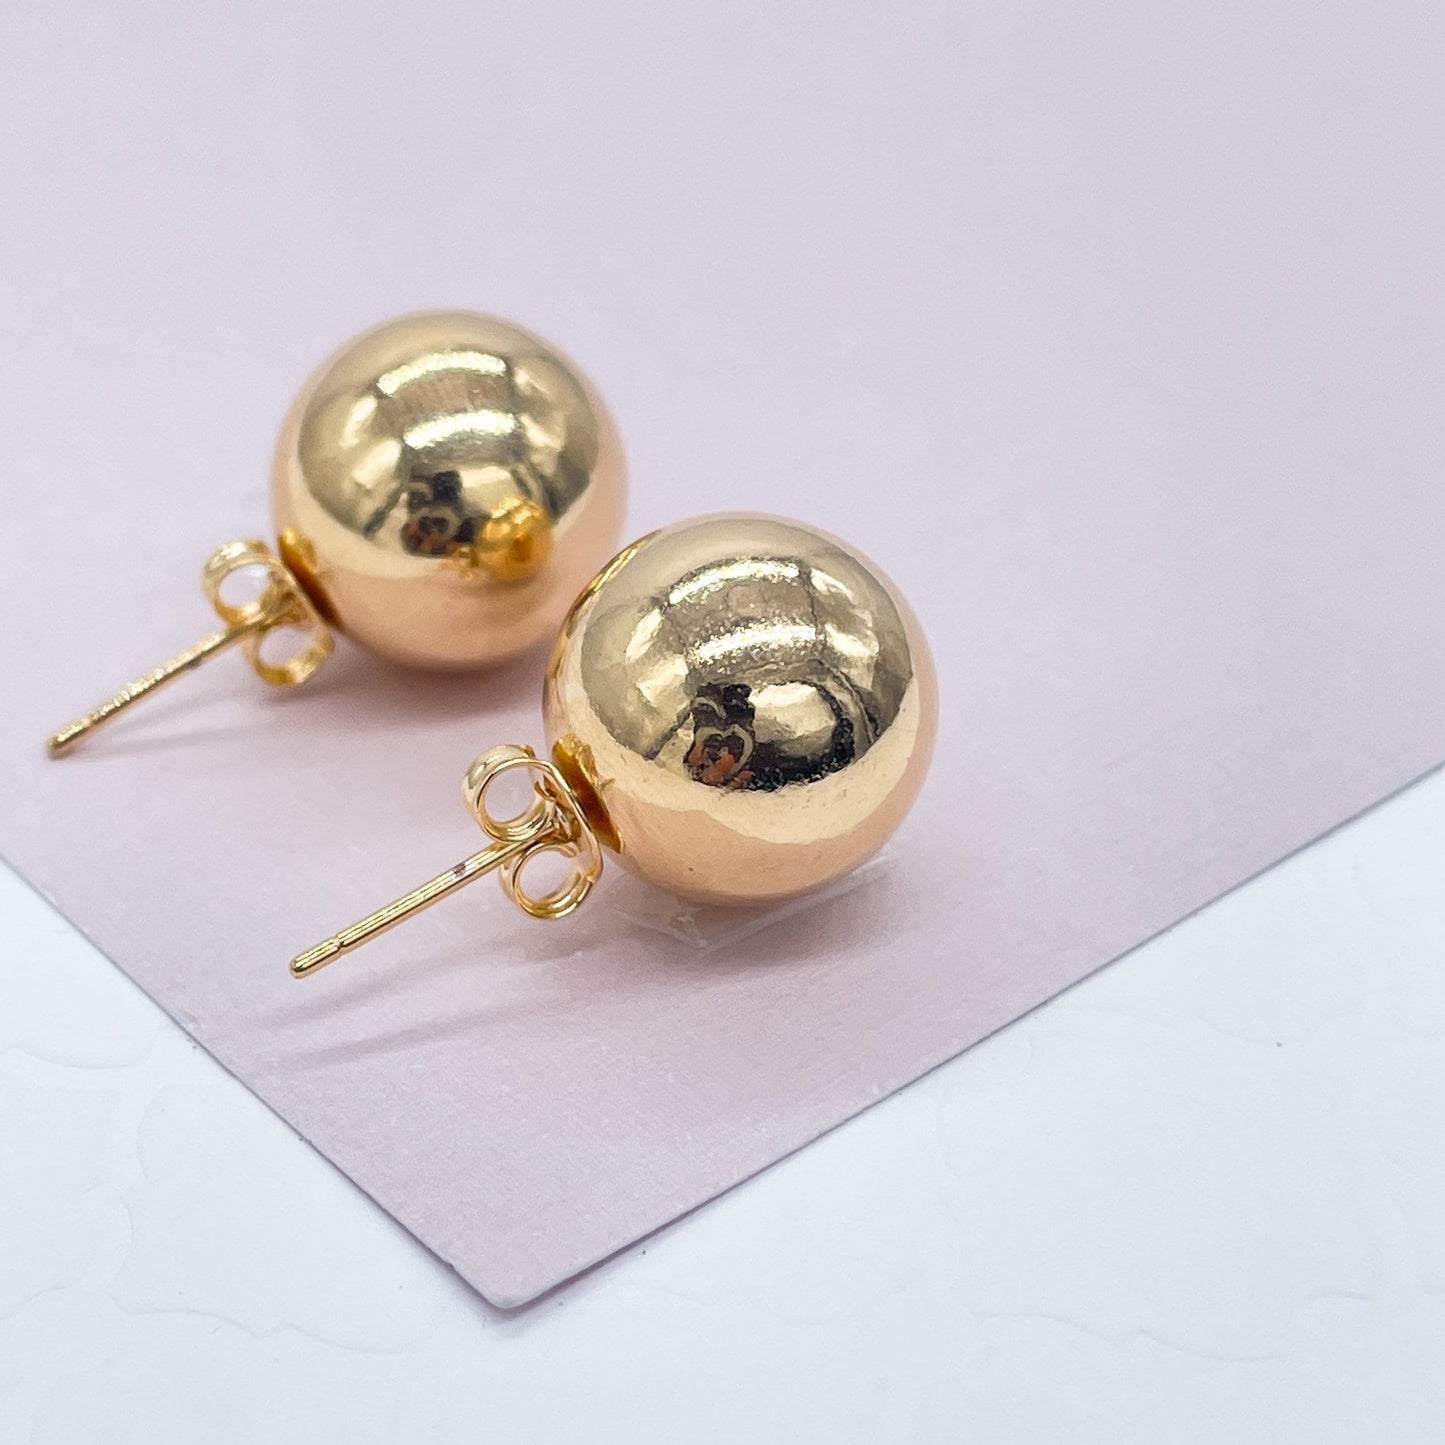 18k Gold Filled 13mm Ball Stud Earrings Available in Gold, Rose Gold and Silver